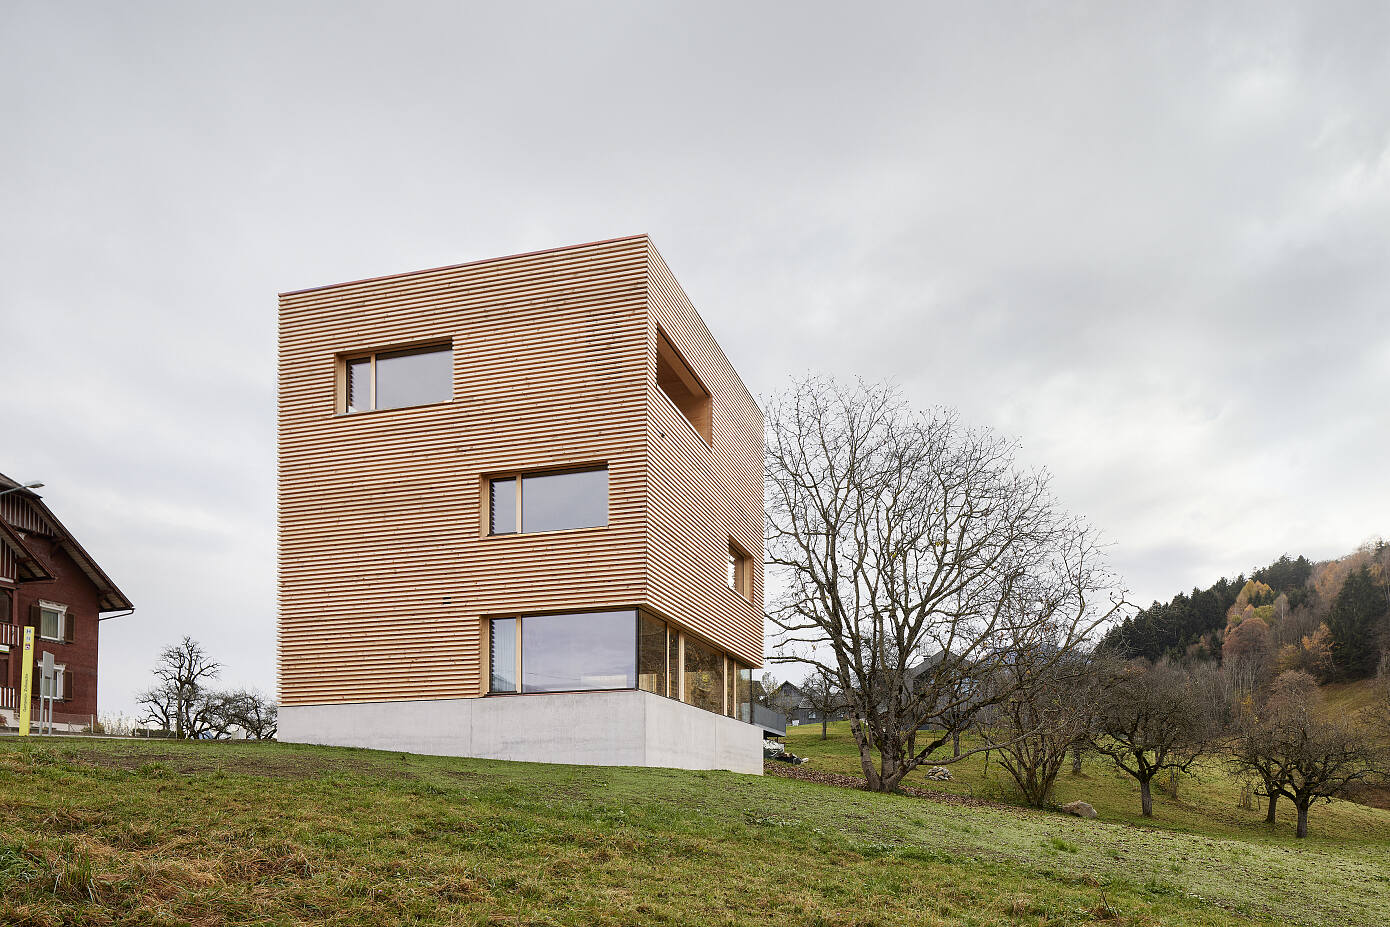 House in the Orchard by Firm Architekten